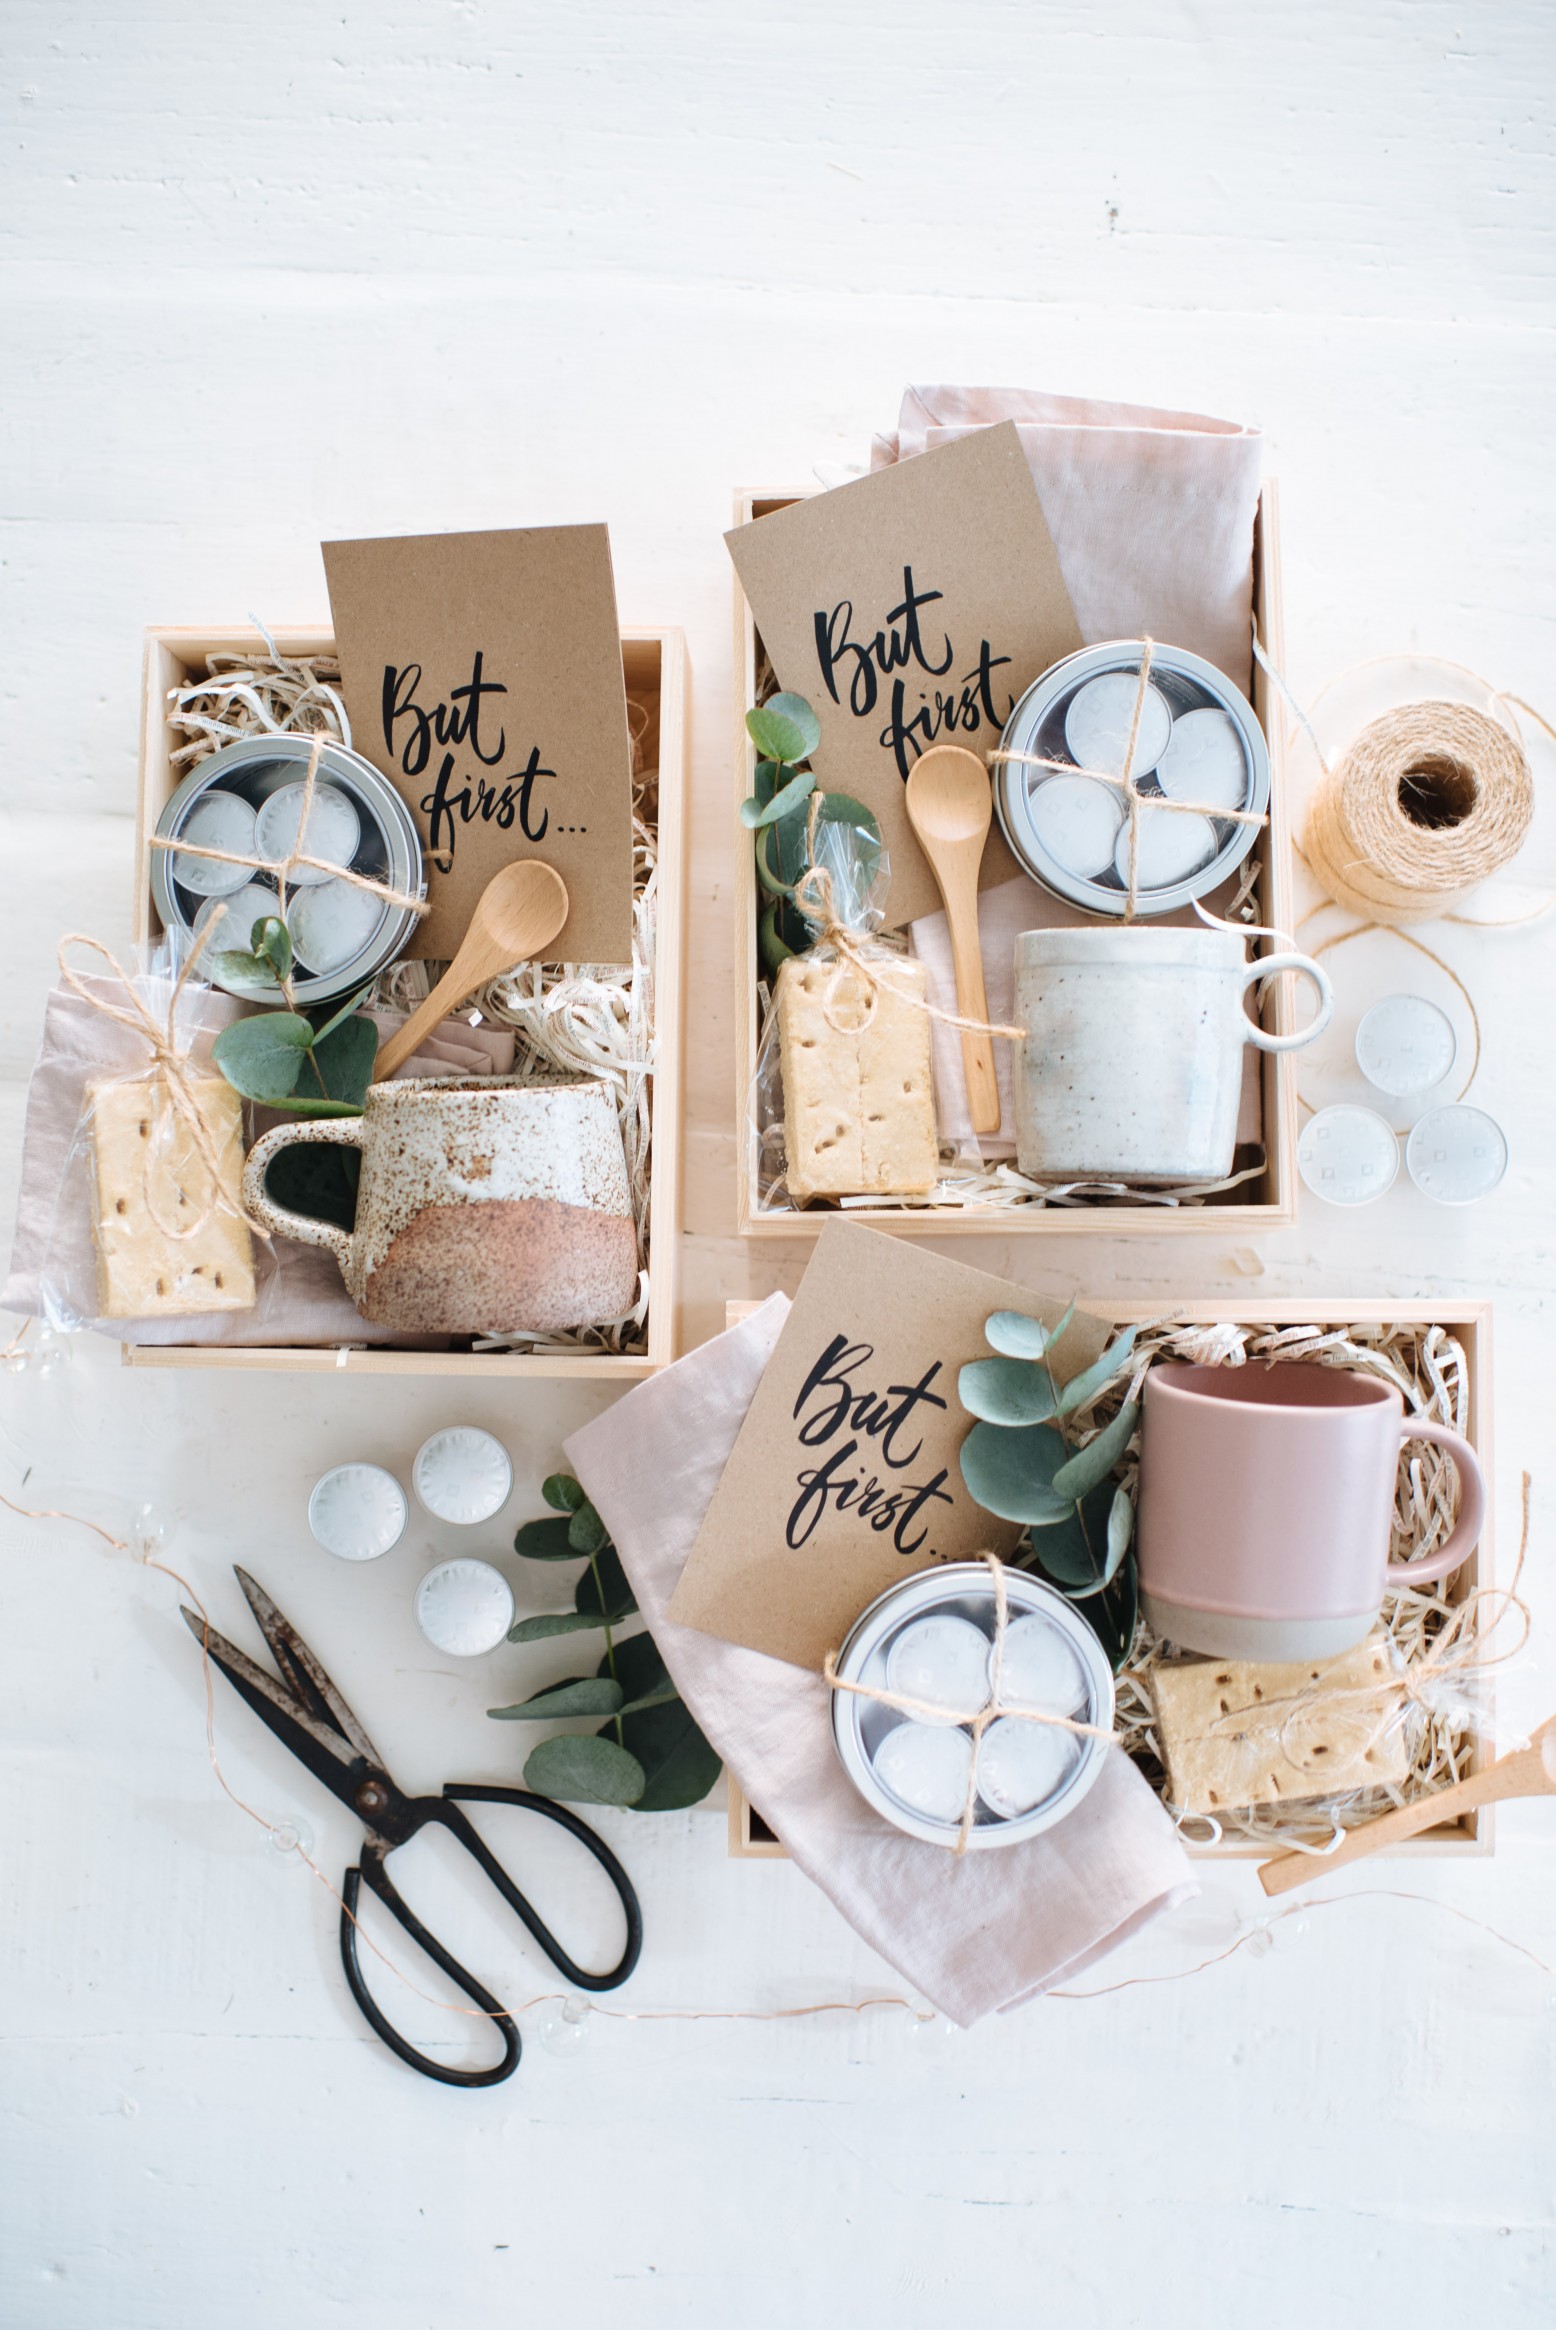 Homemade gift ideas that everyone will love this Christmas, especially your bank account! Easy DIY presents that can be personalized for the person who has it all! #DIYgifts #DIYpresents #homemadegifts | Nikkis Plate